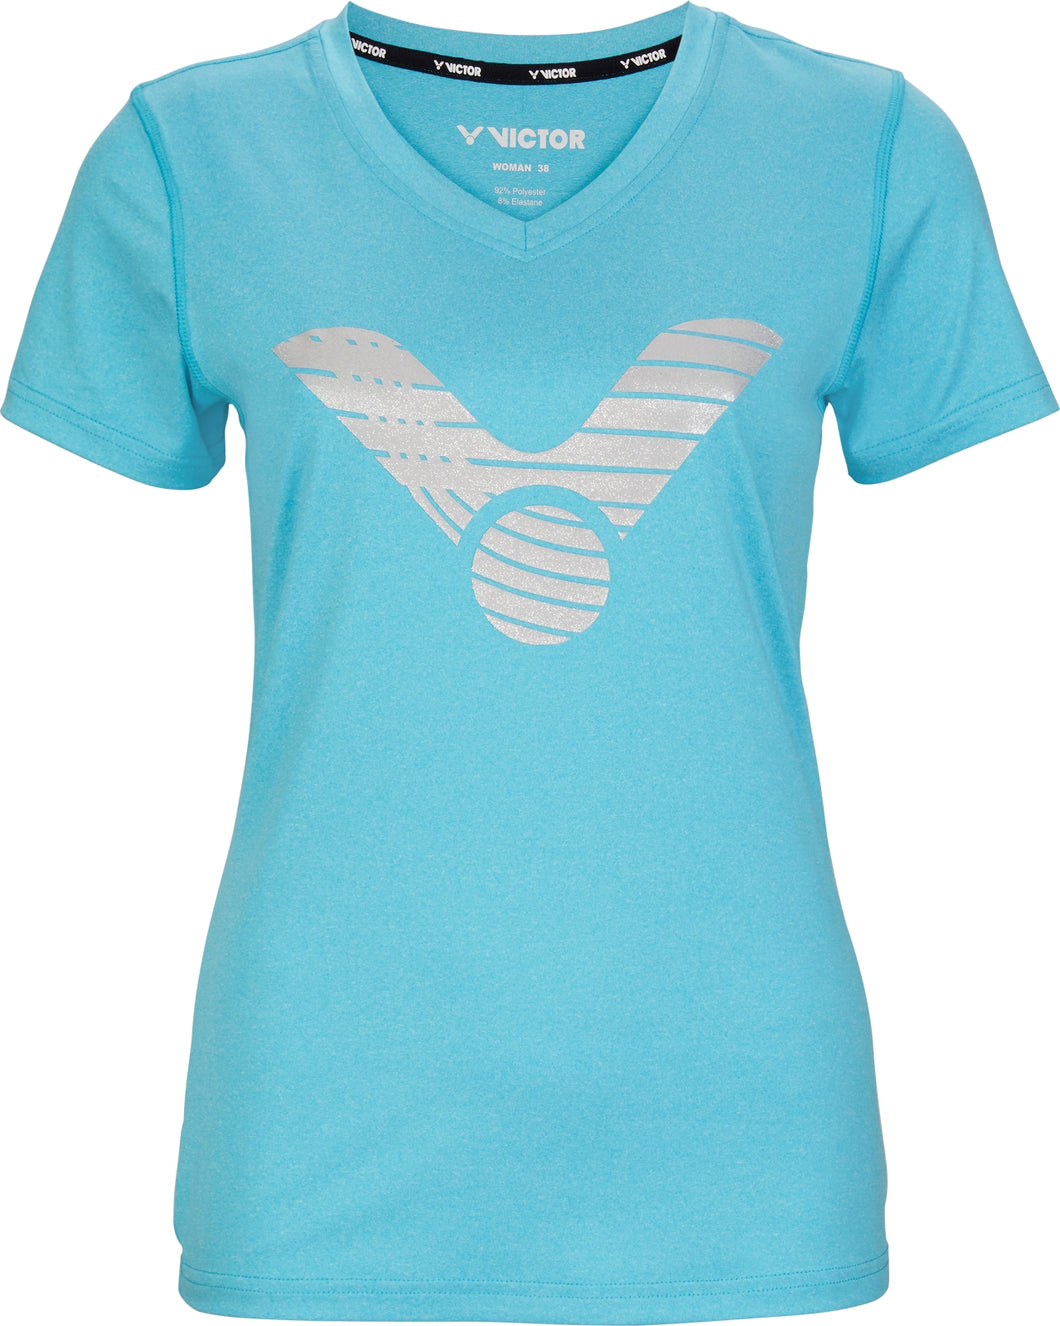 Victor T-SHIRT T-04104 M ICE BLUE WOMENS